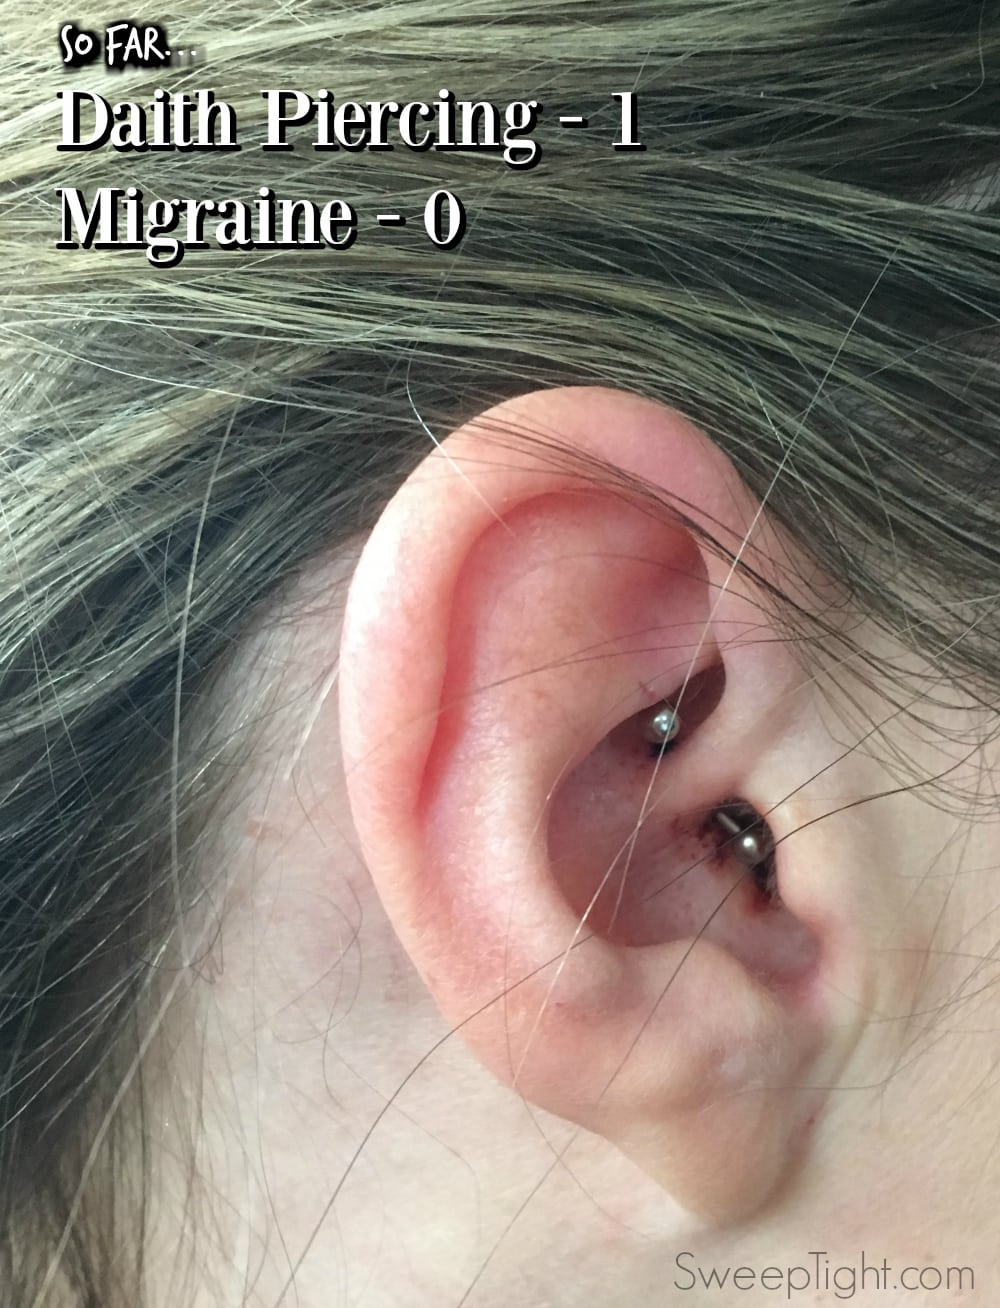 Trying Daith Piercing For Migraines After Years Of Pain